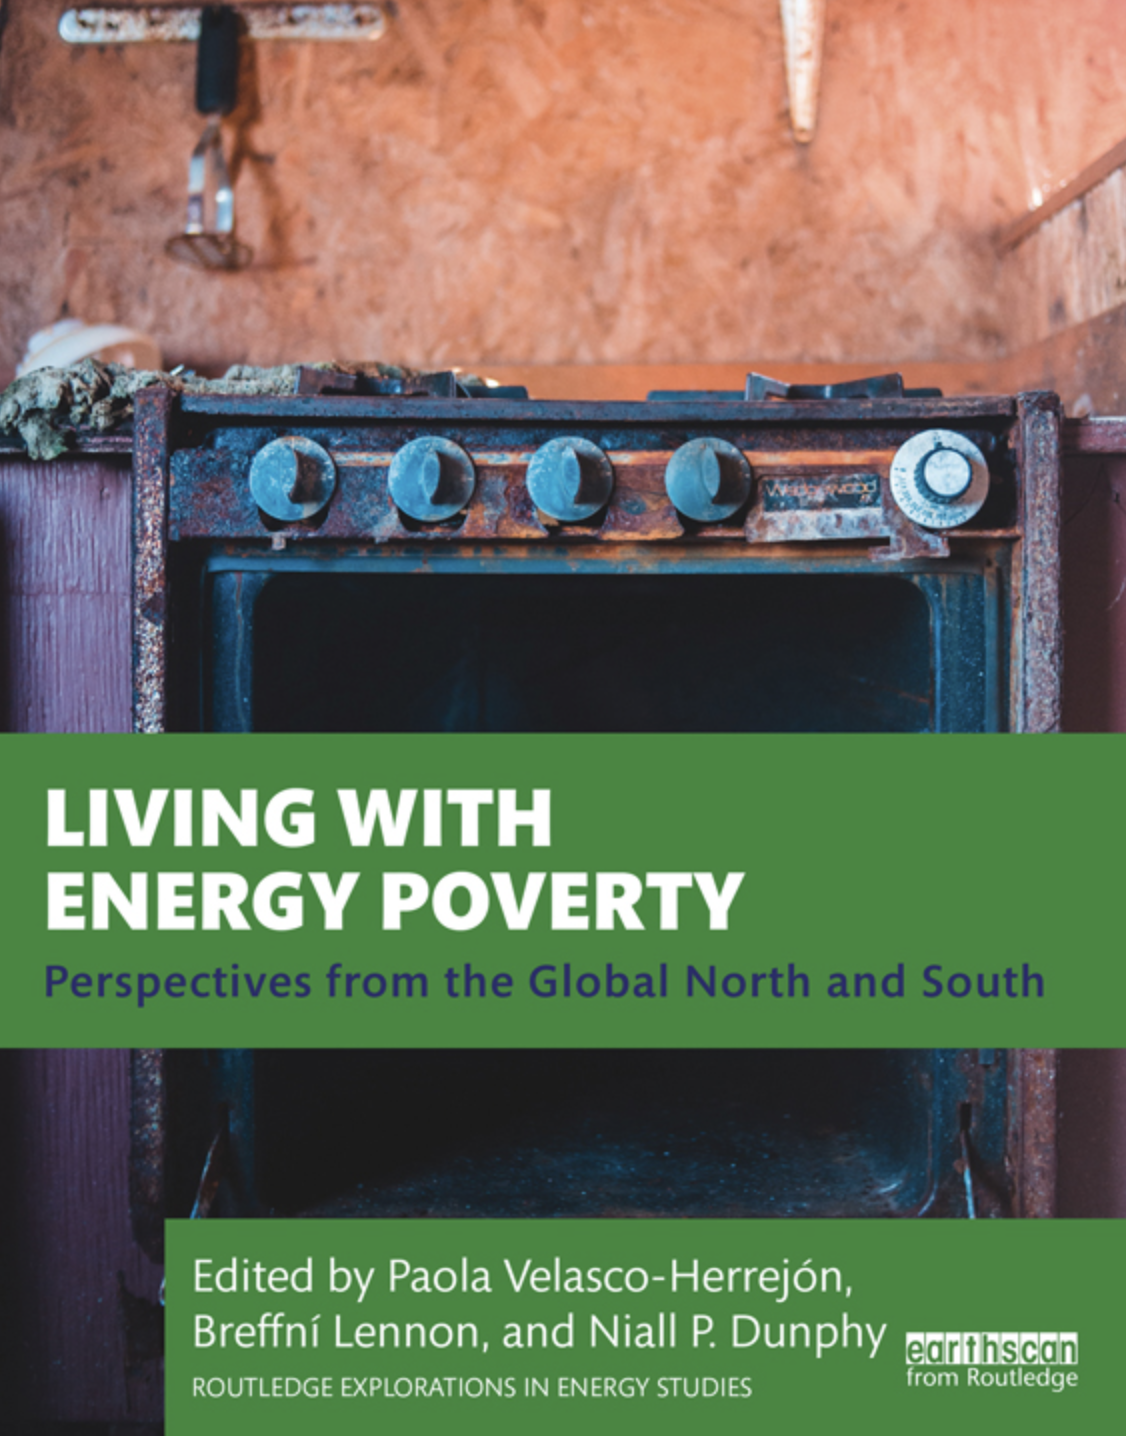 Book cover: Living with energy poverty, perspectives from the global north and south